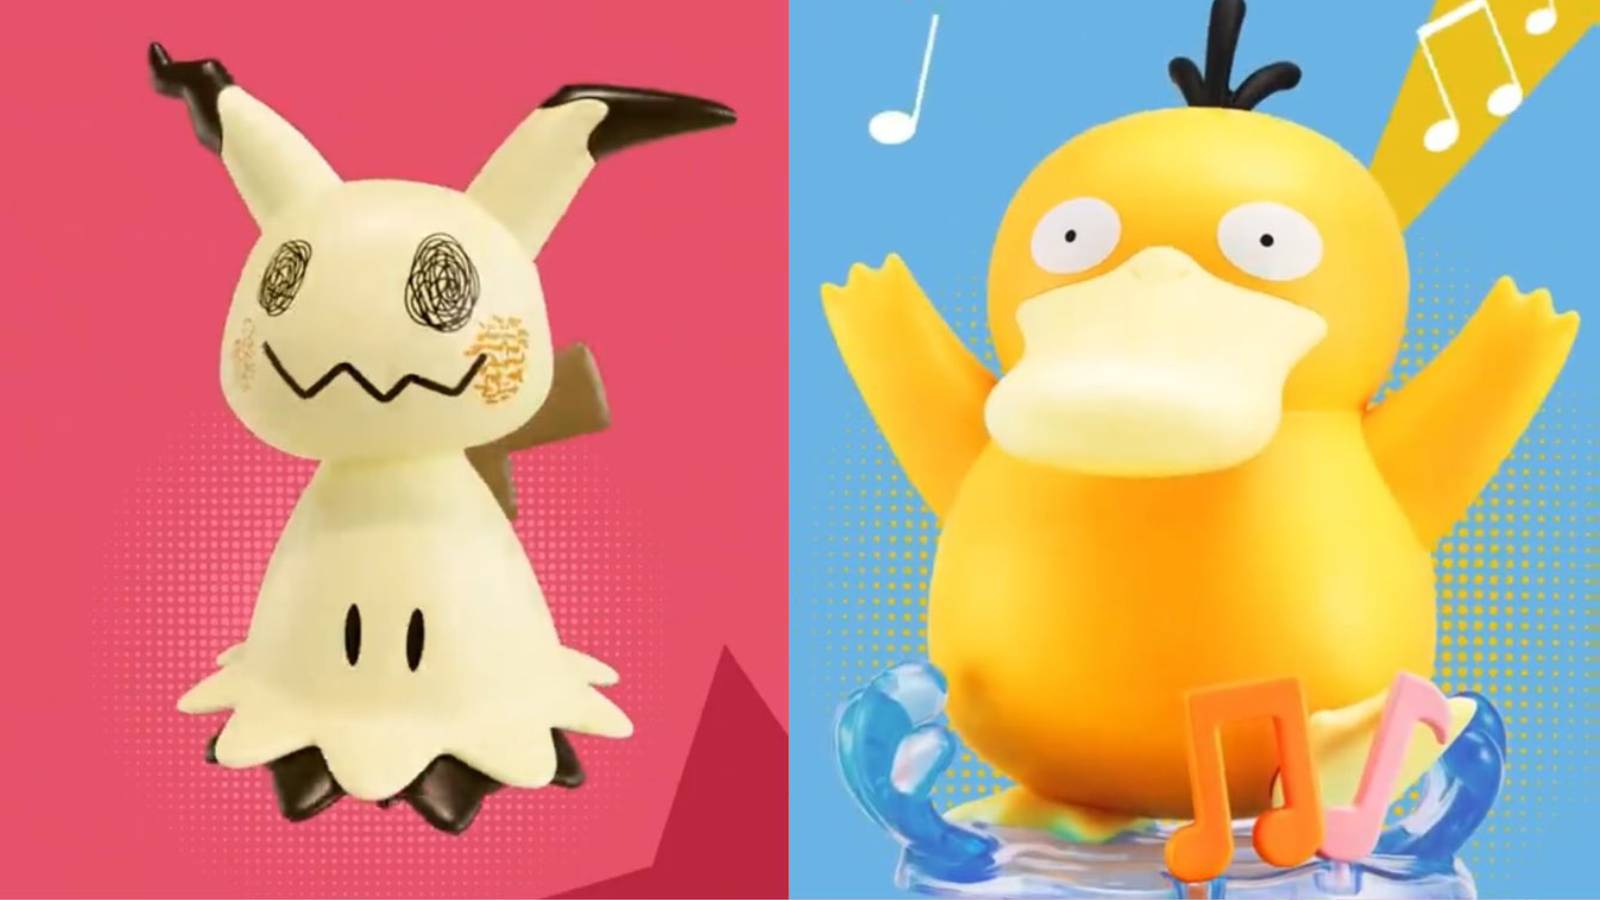 Promotional artwork from KFC shows toys of the Pokemon Mimikyu and Psyduck